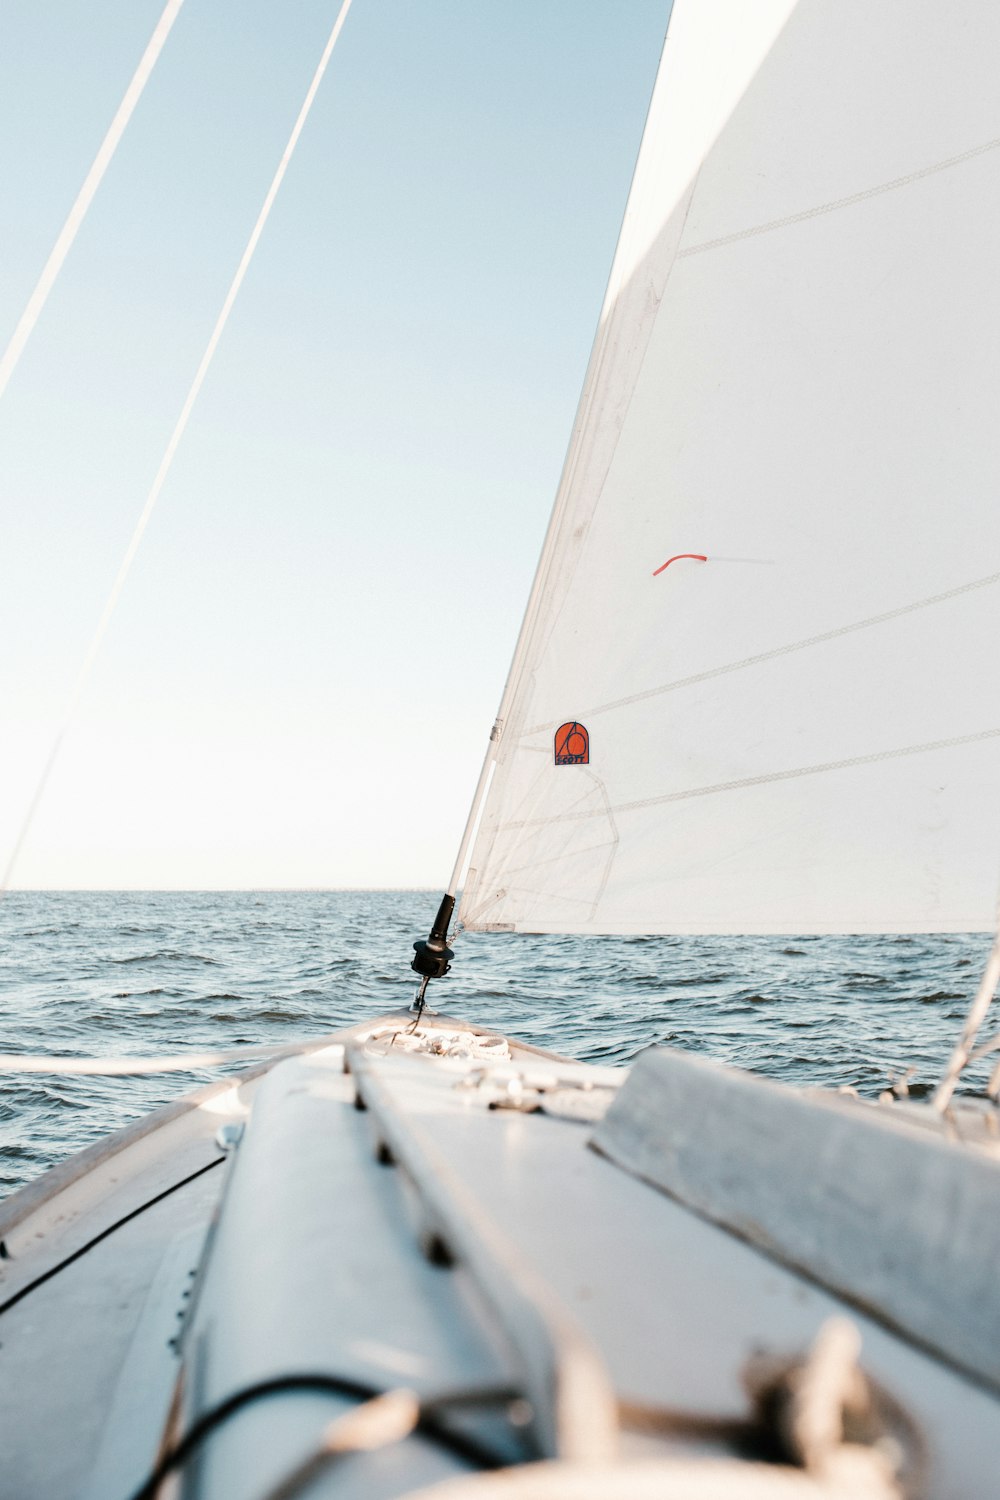 100+ Sailing Pictures | Download Free